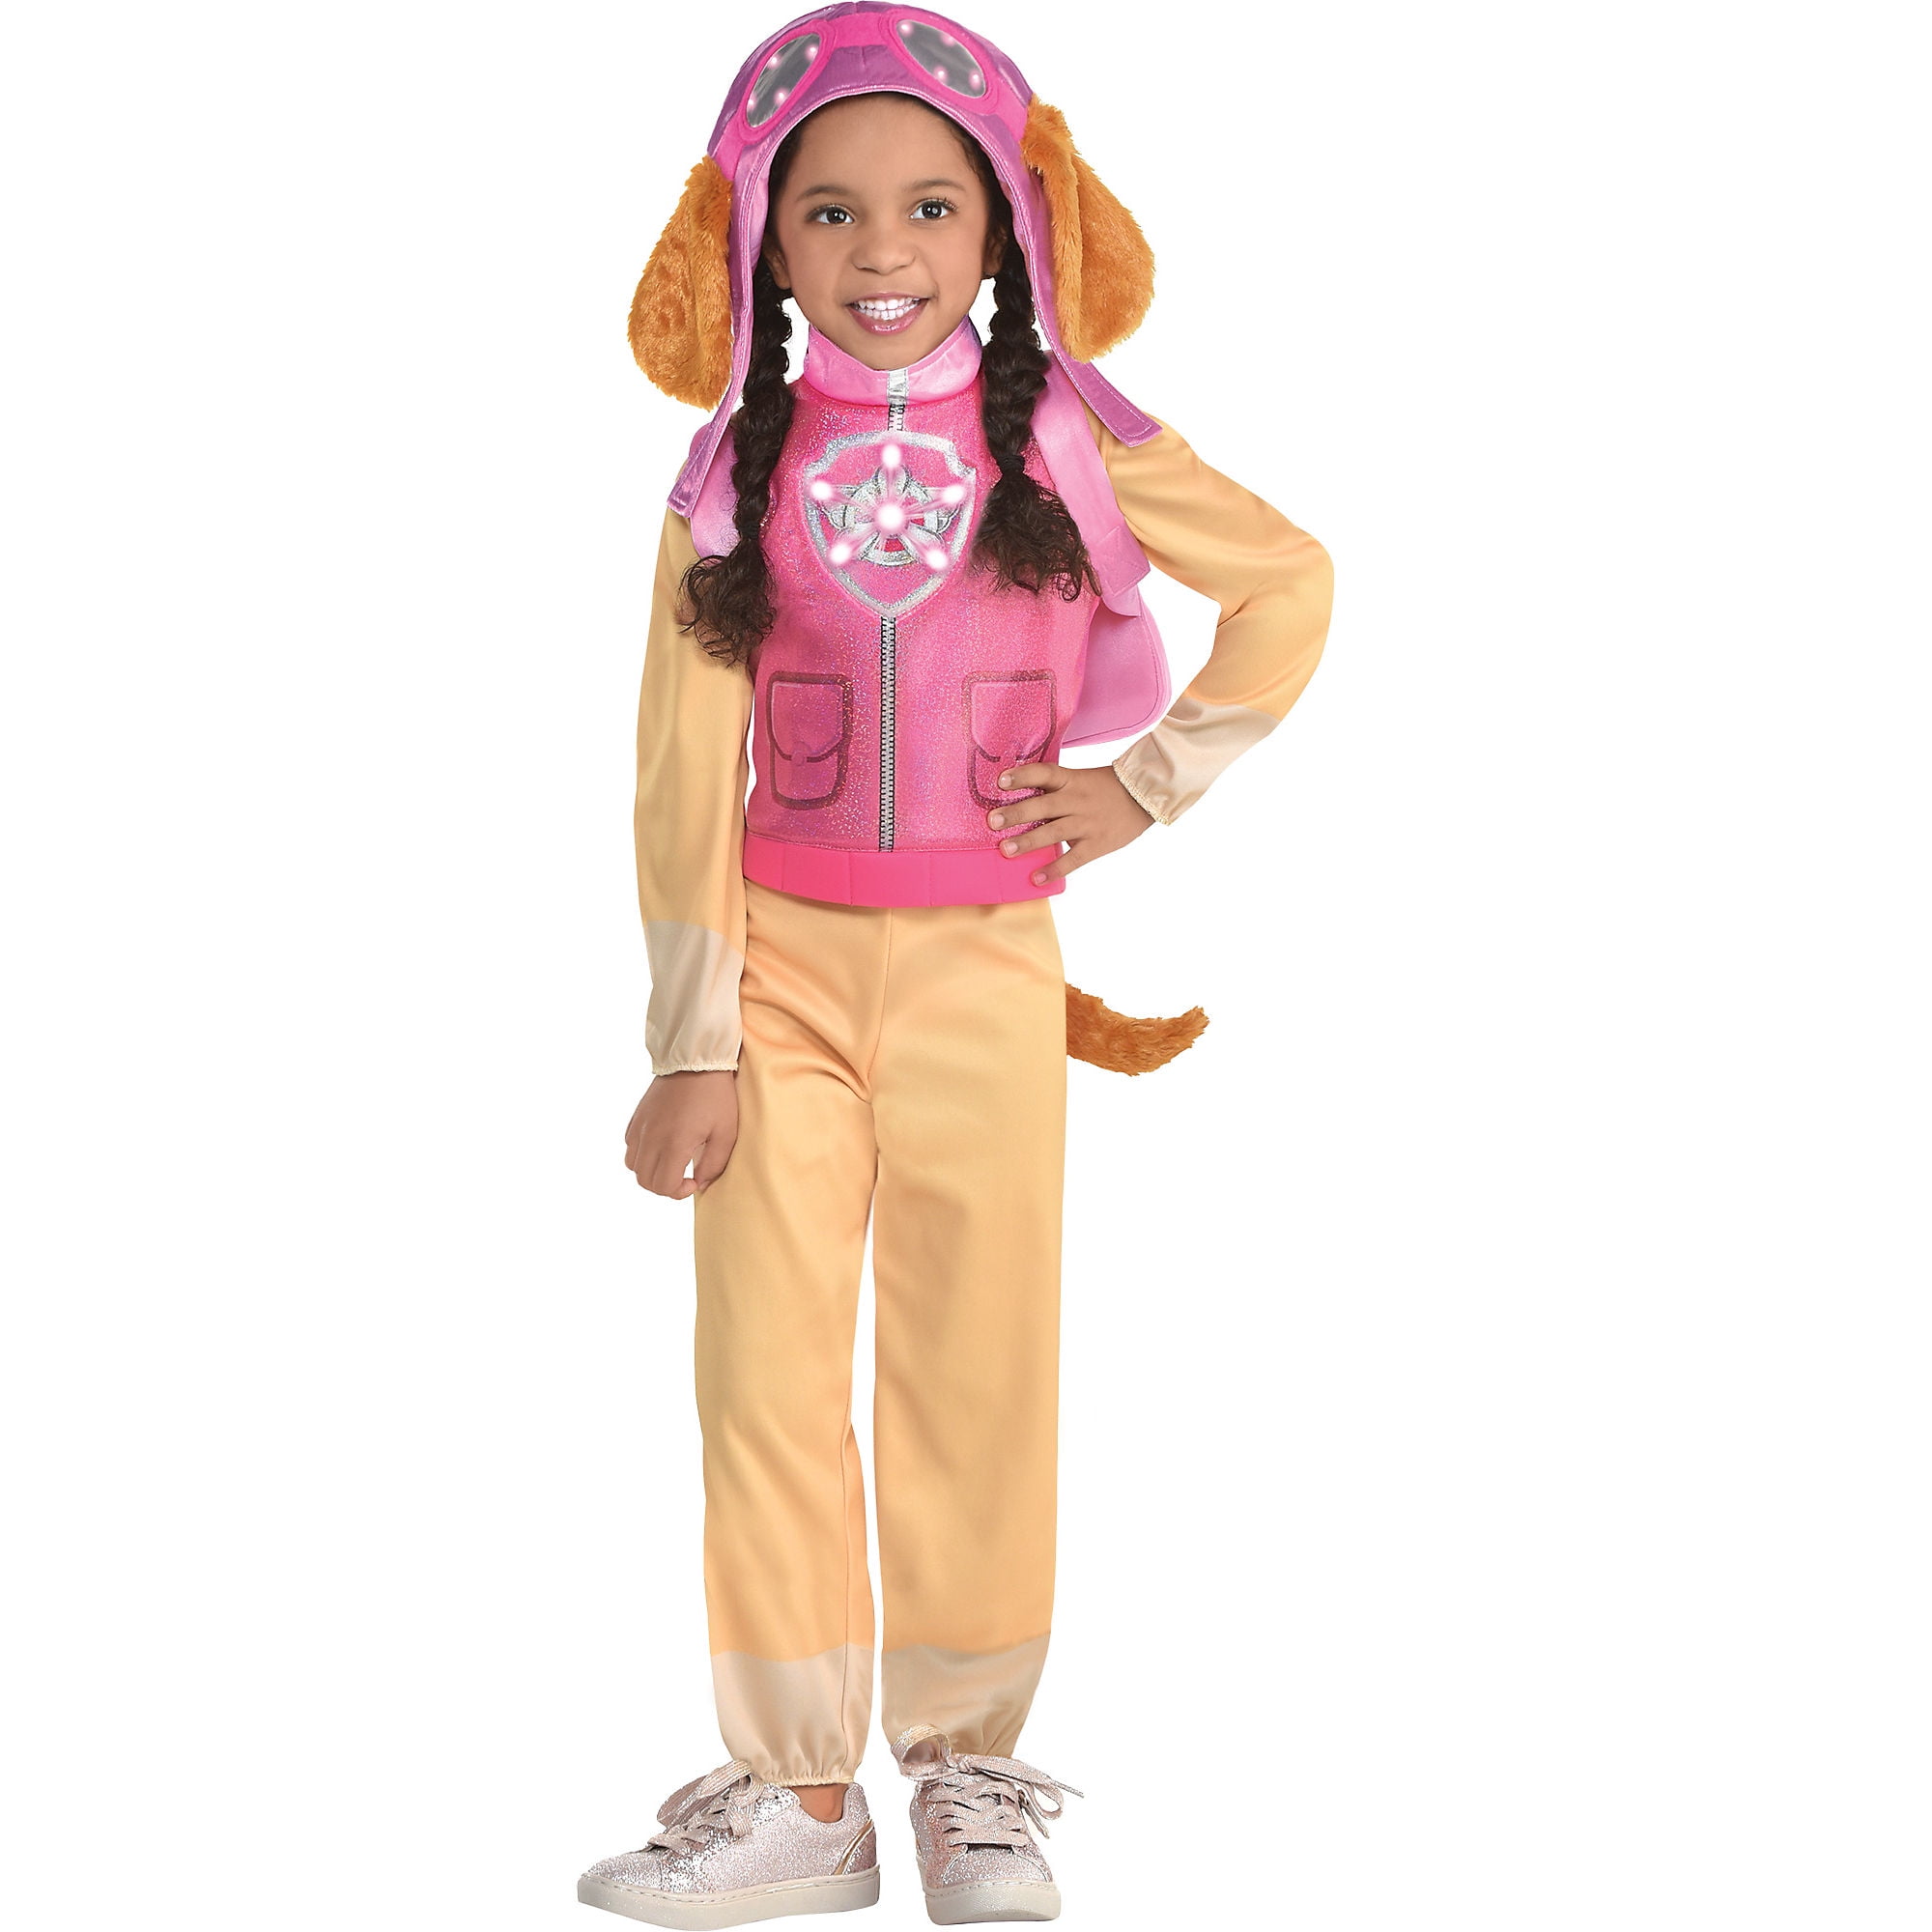 Skye Halloween Costume for Toddler Girls, PAW Patrol, 3-4T, Includes Jumpsuit, Hat and Backpack Walmart.com